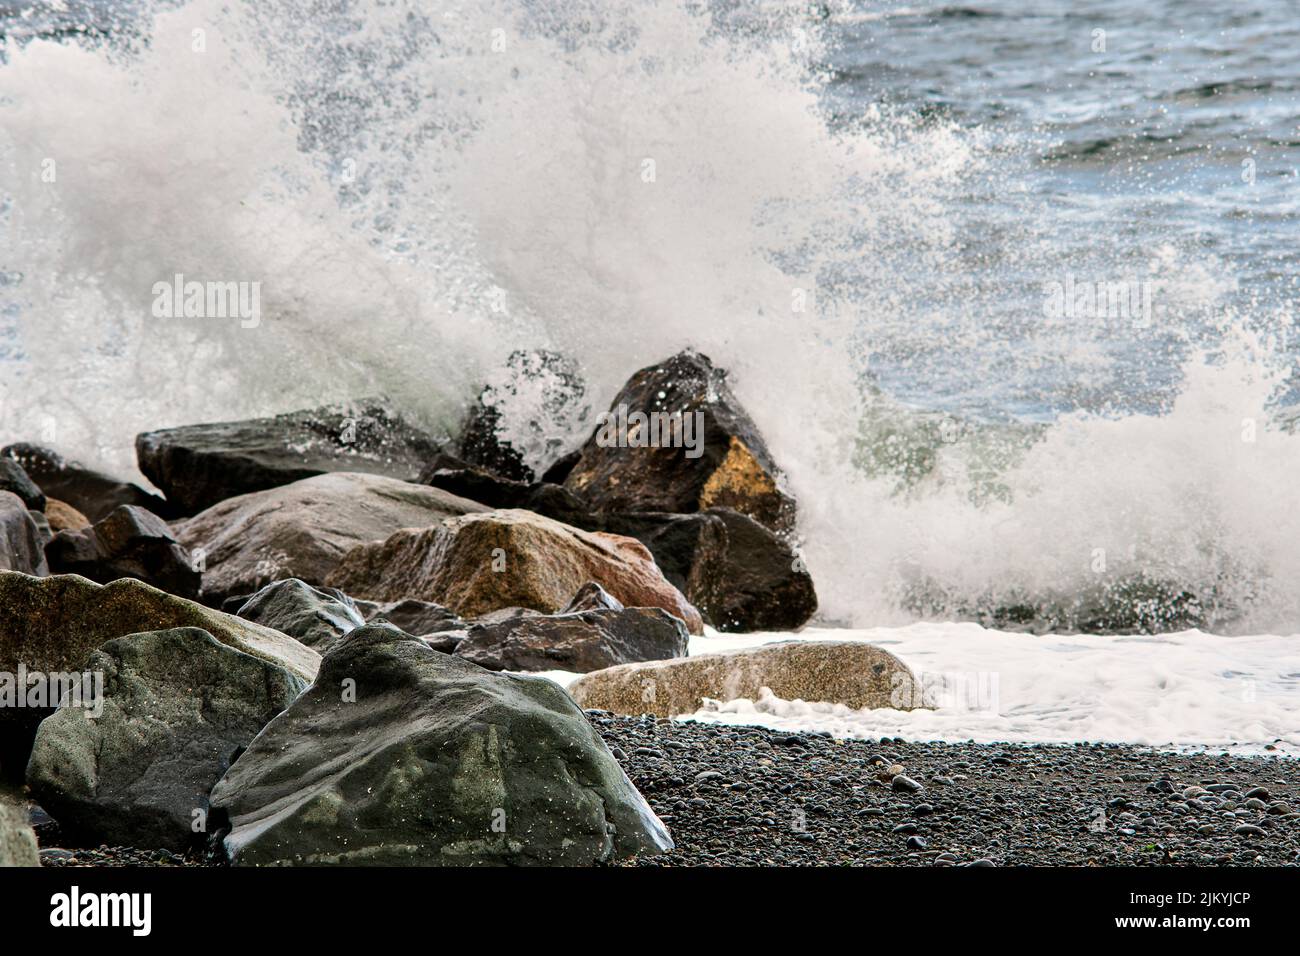 Ocean waves splashing against the rocks on a stormy day, Stock Photo